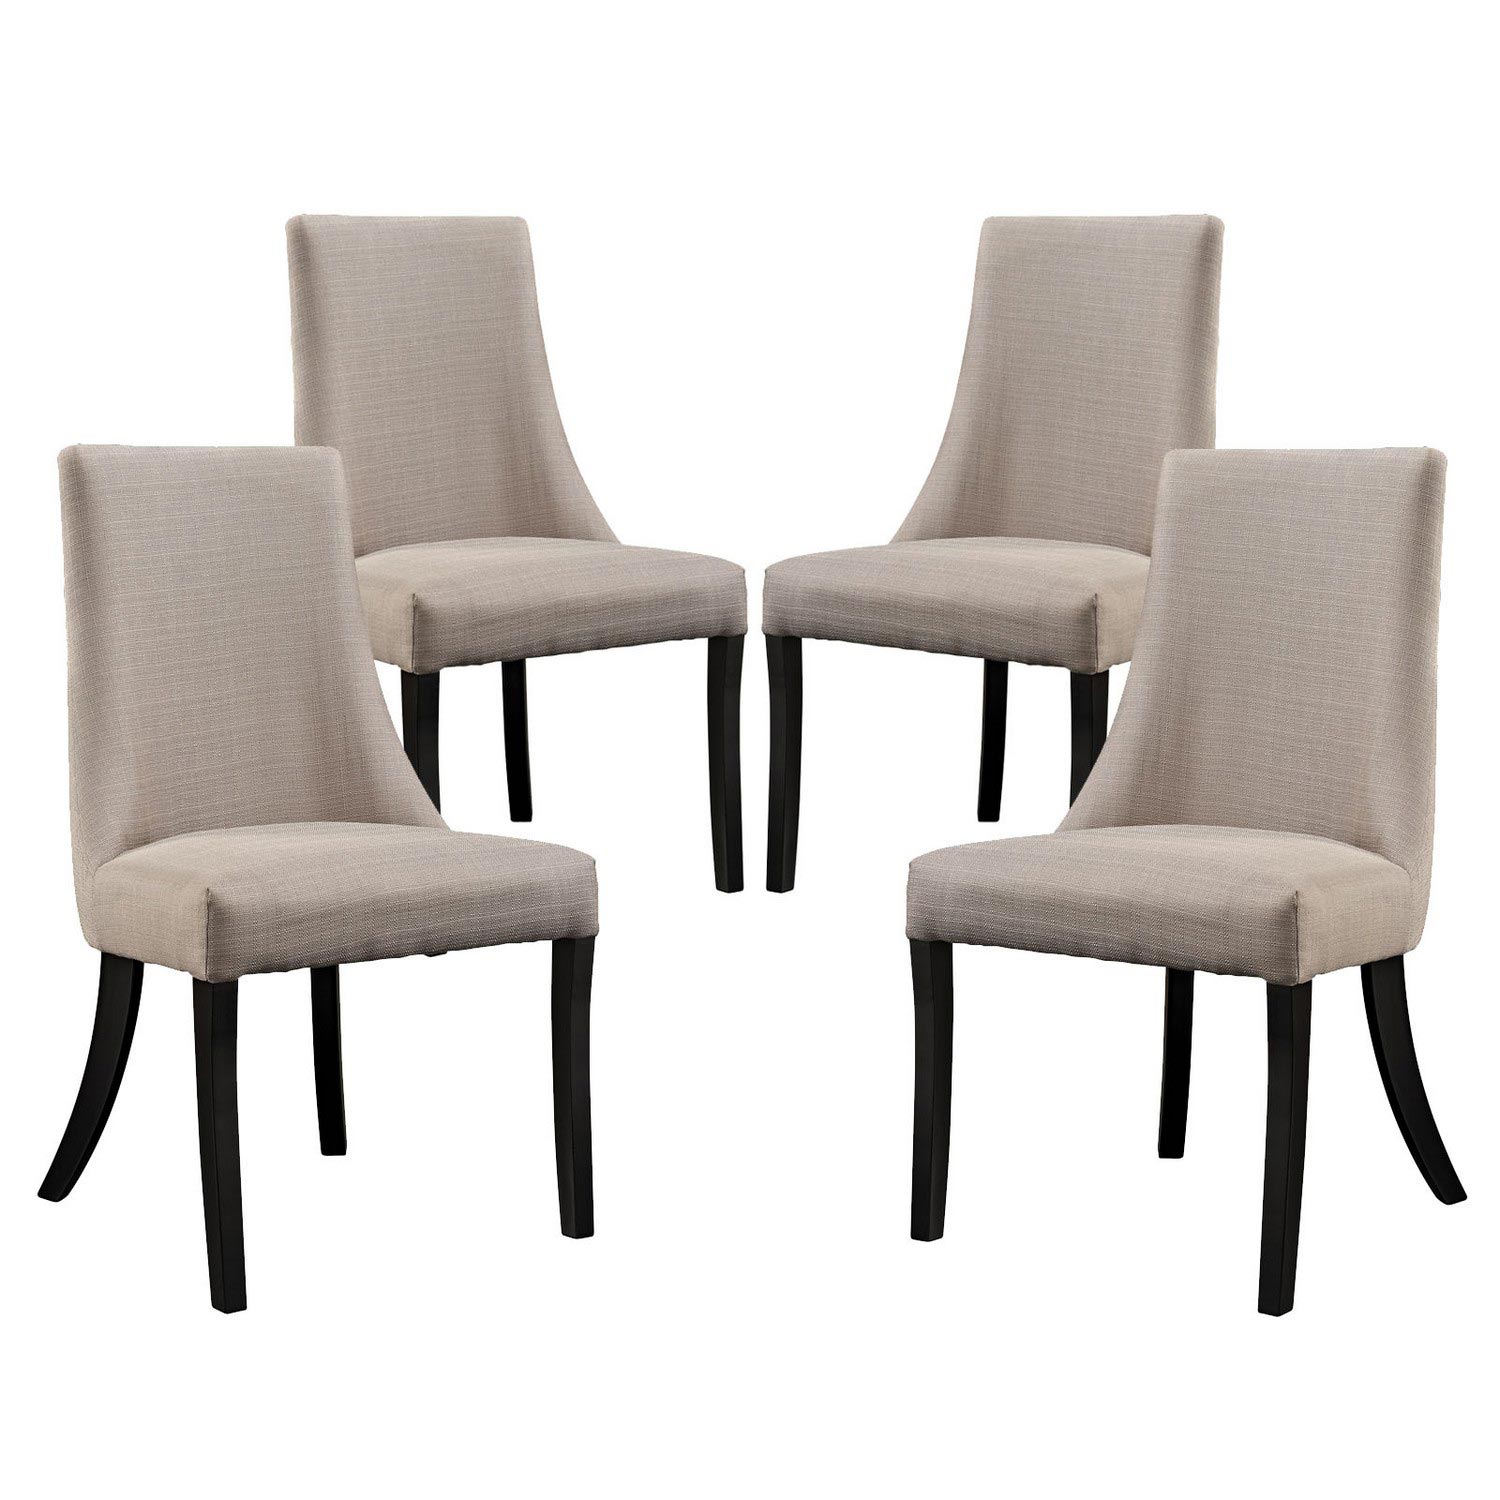 Modway Reverie Dining Side Chair Set of 4 - Beige